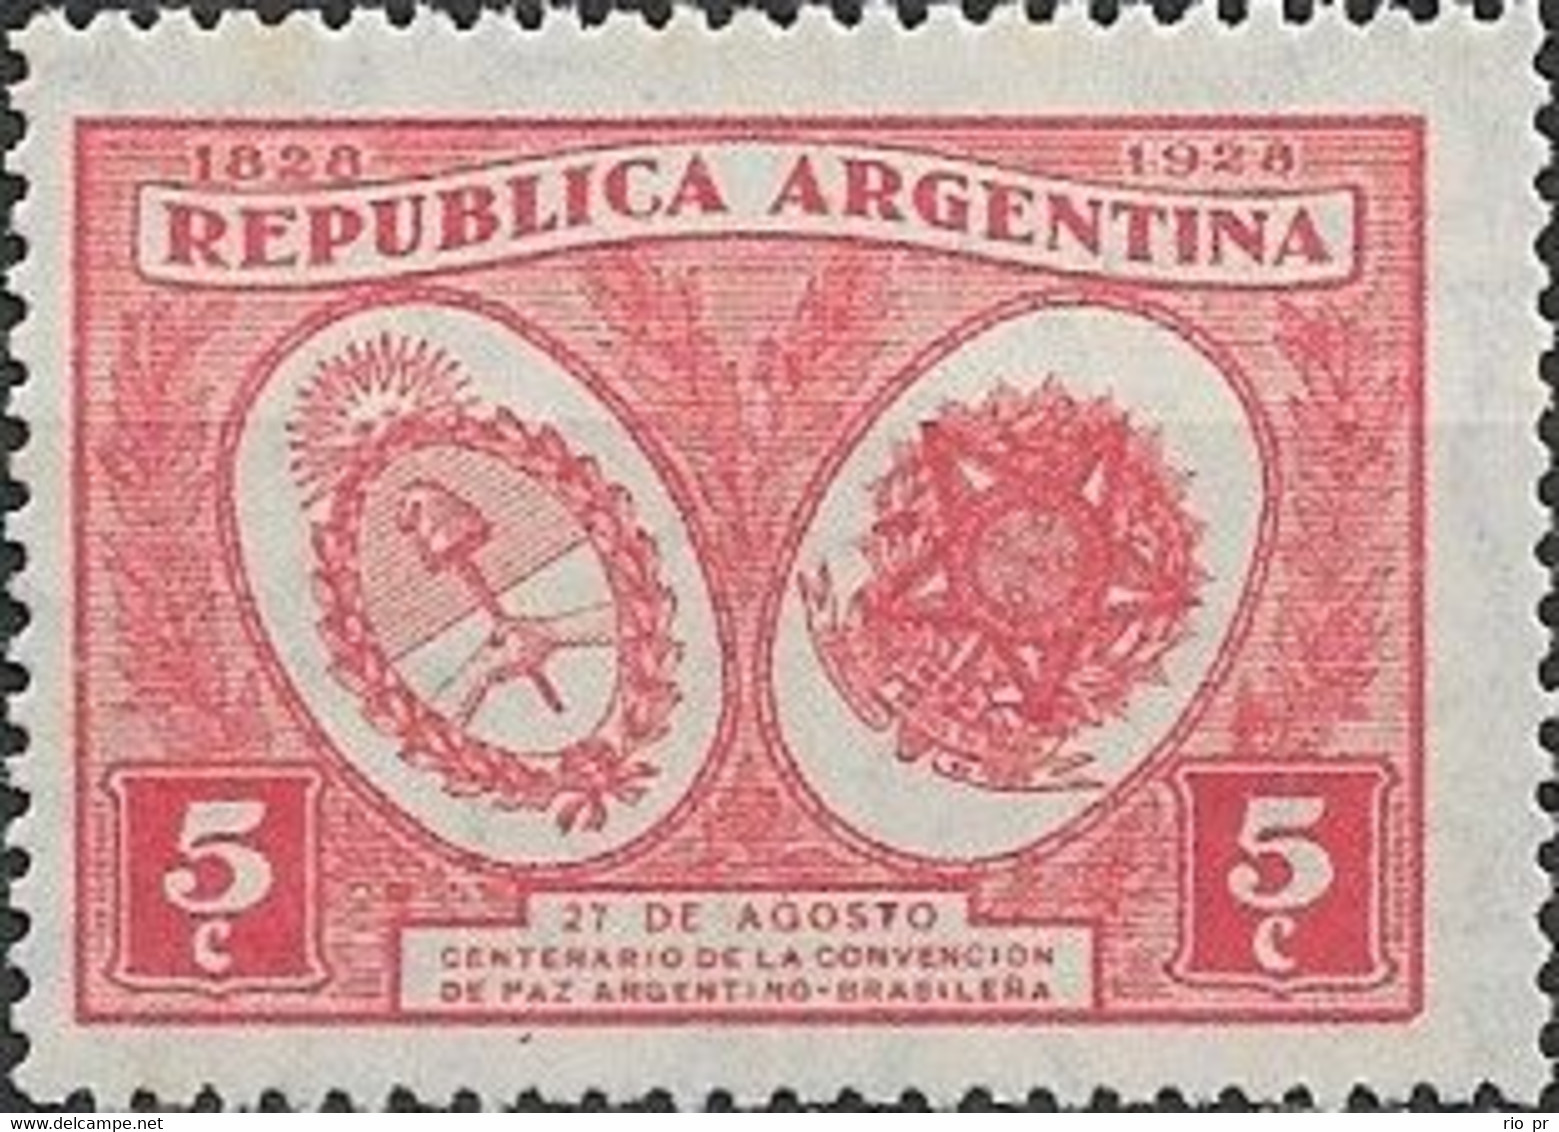 ARGENTINA - CENTENARY OF PEACE BETWEEN BRAZIL AND THE UNITED PROVINCES OF THE RIO DE LA PLATA (5 C) 1928 - MNH - Ungebraucht